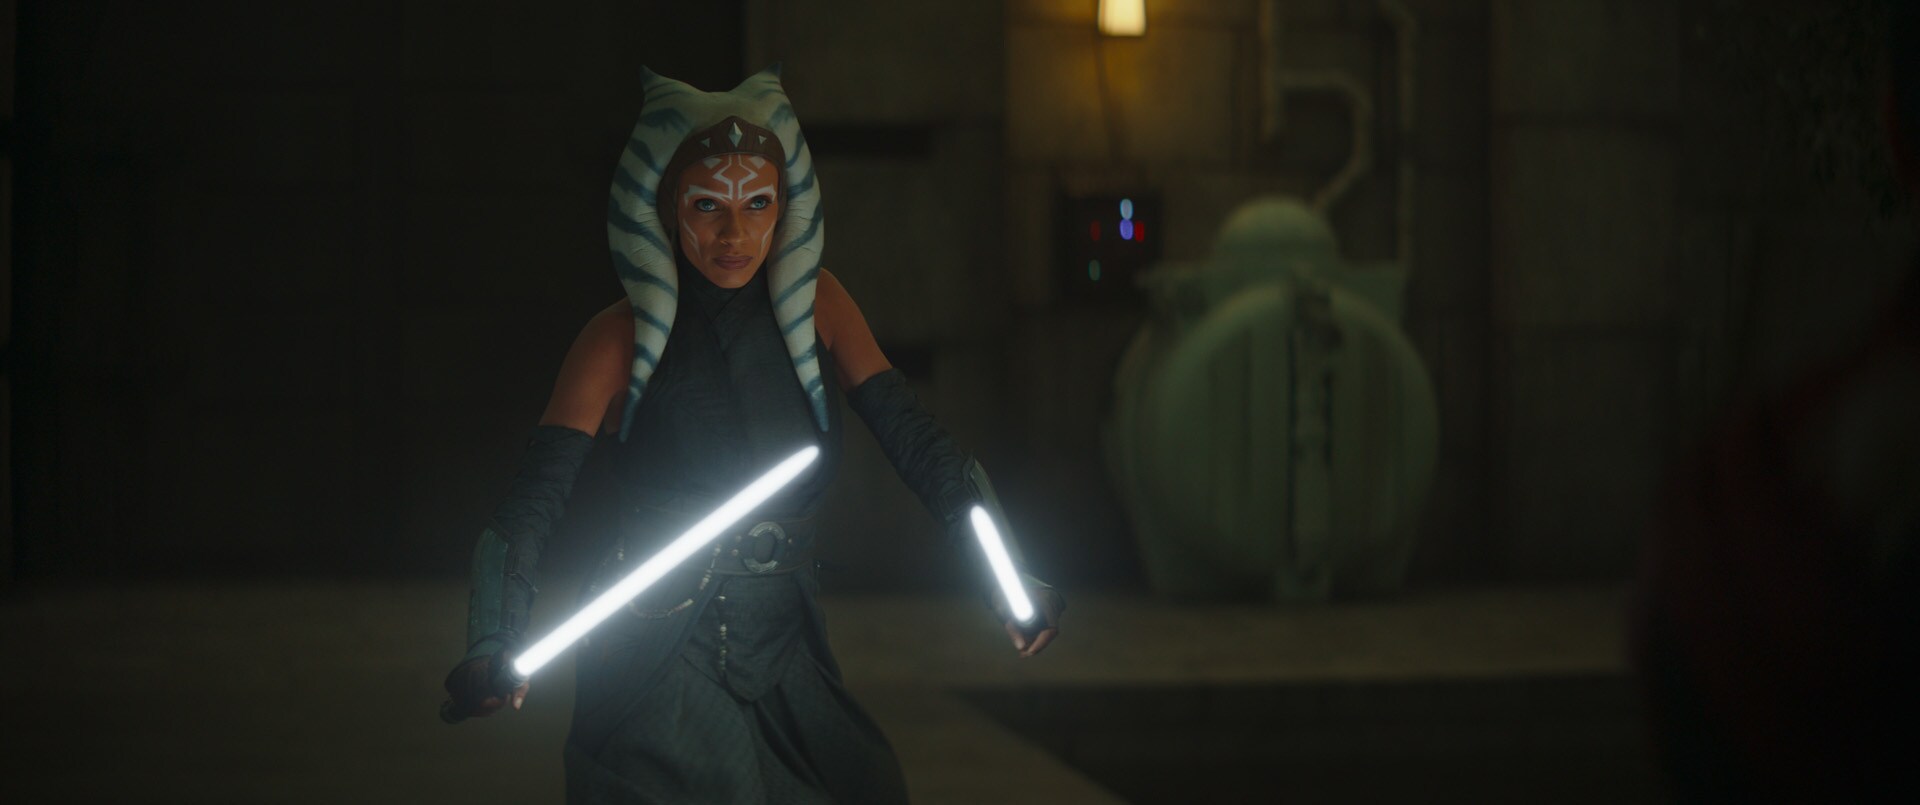 Ahsoka traveled to Corvus to face Magistrate Morgan Elsbeth, in search of Elsbeth’s master, Thrawn.